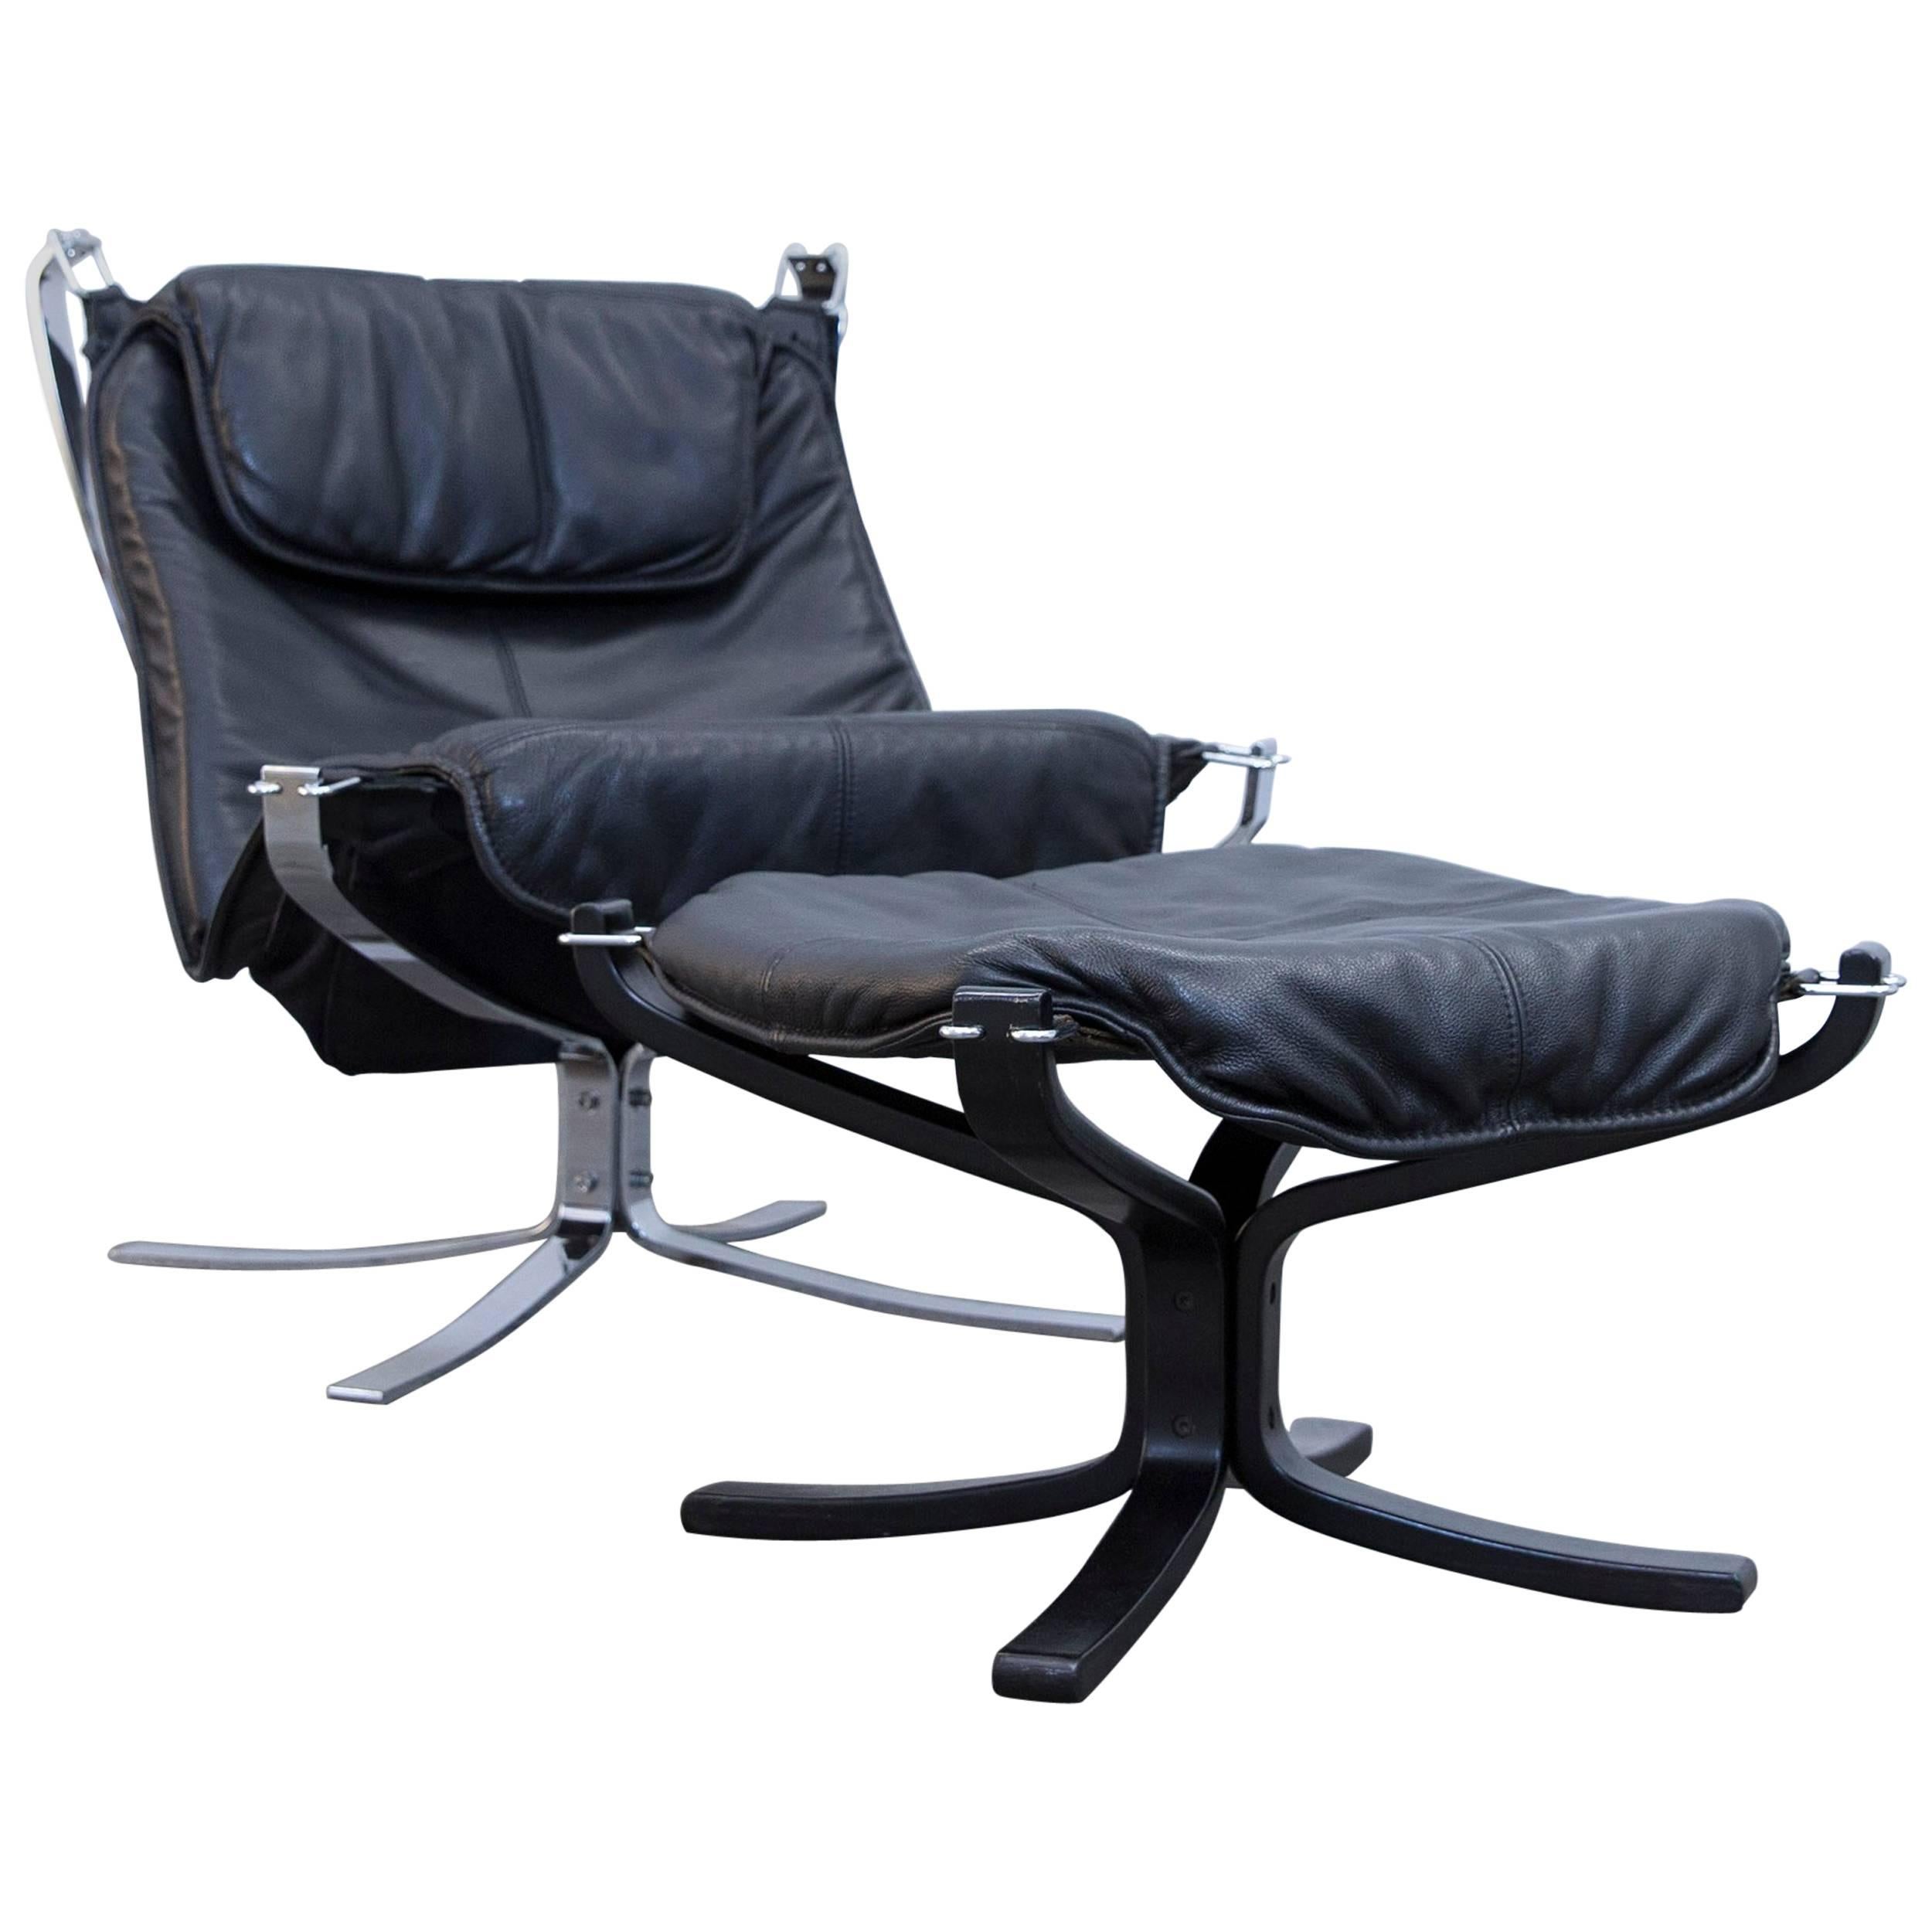 Sigurd Resell Falcon Chair Leather Black Chrome One-Seat Footstool Modern